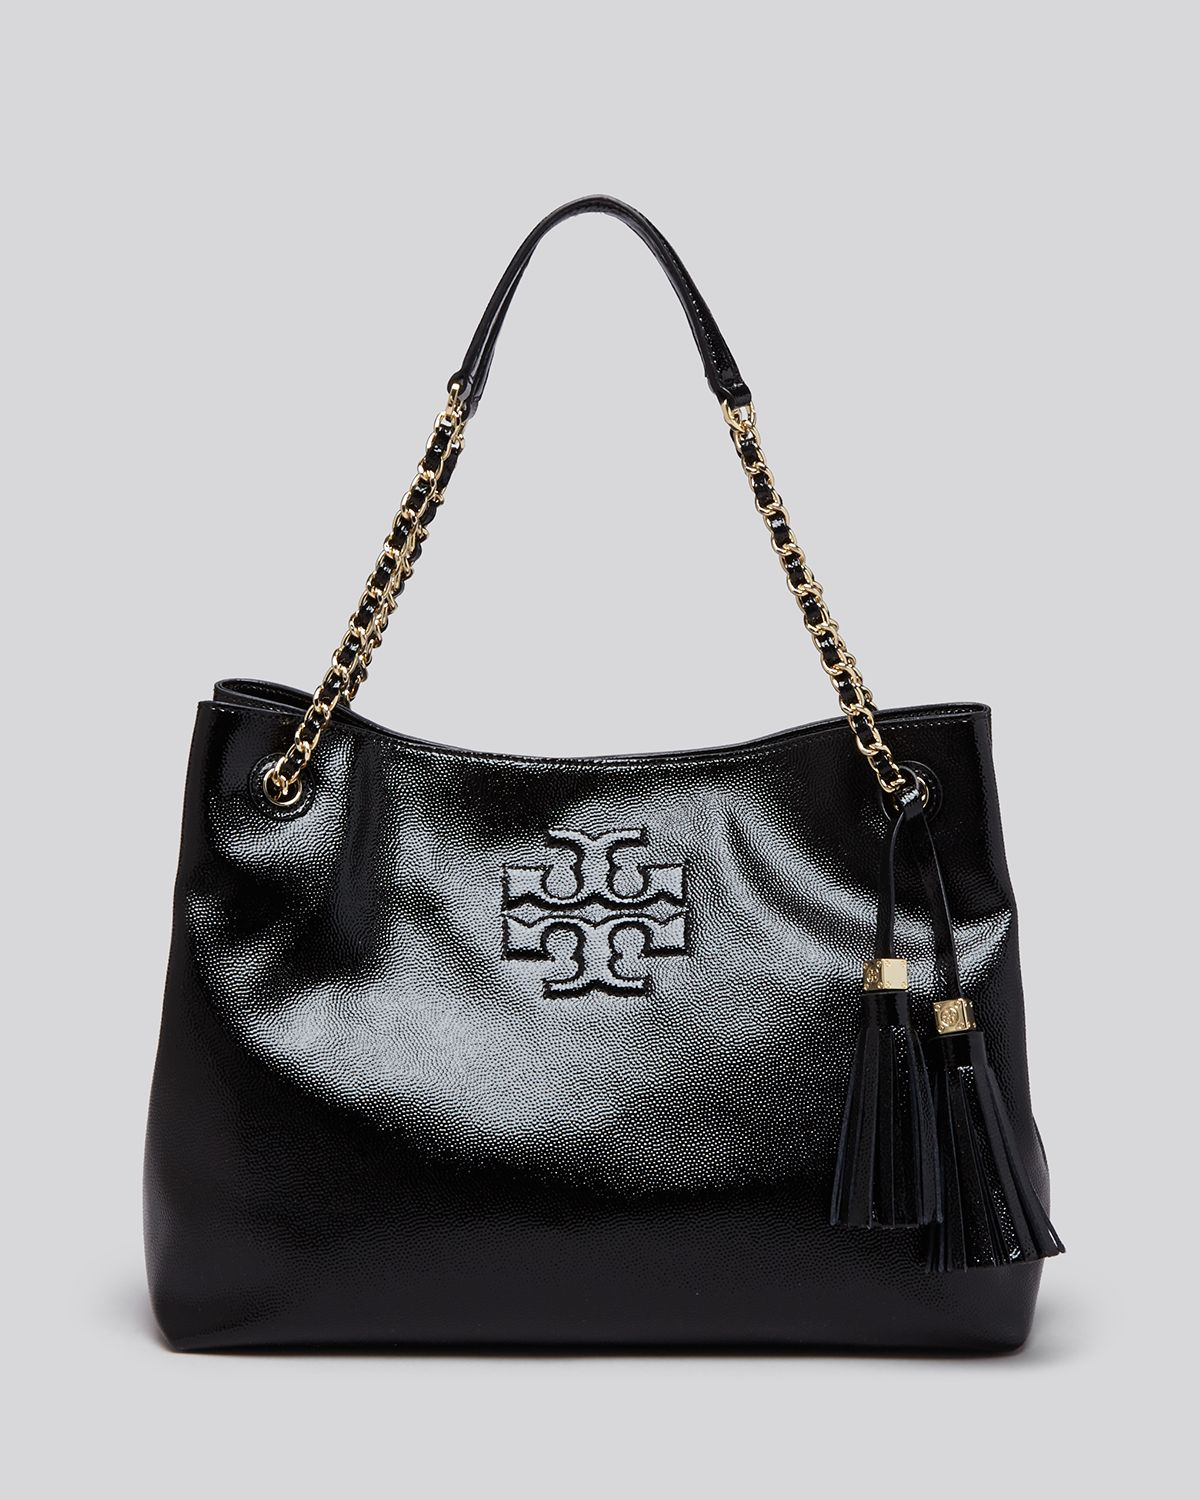 Tory Burch Tote - Thea Patent Chain Shoulder Slouchy in Black | Lyst